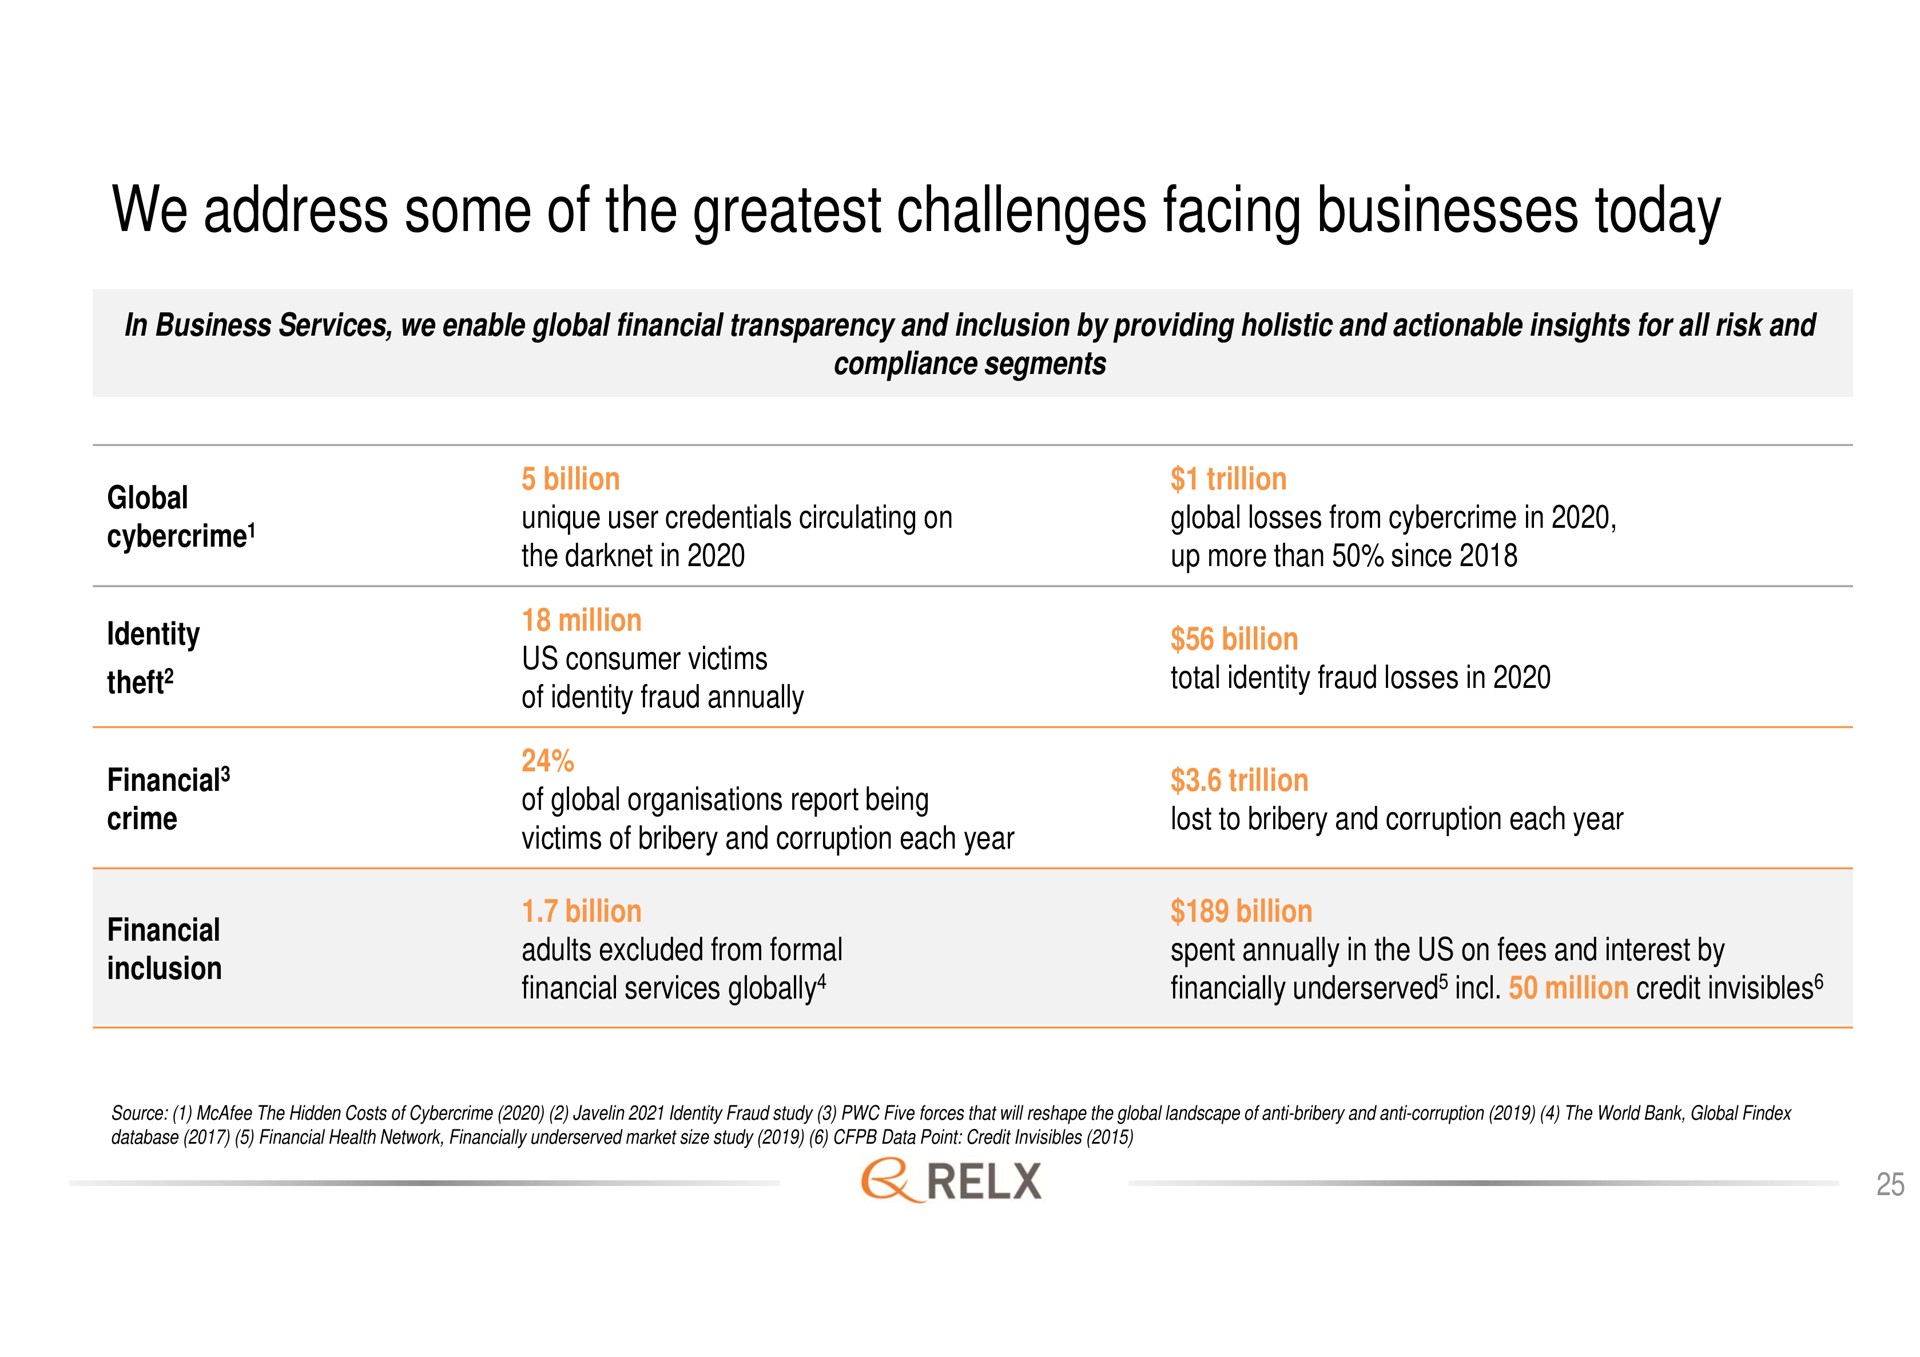 we address some of the challenges facing businesses today | RELX